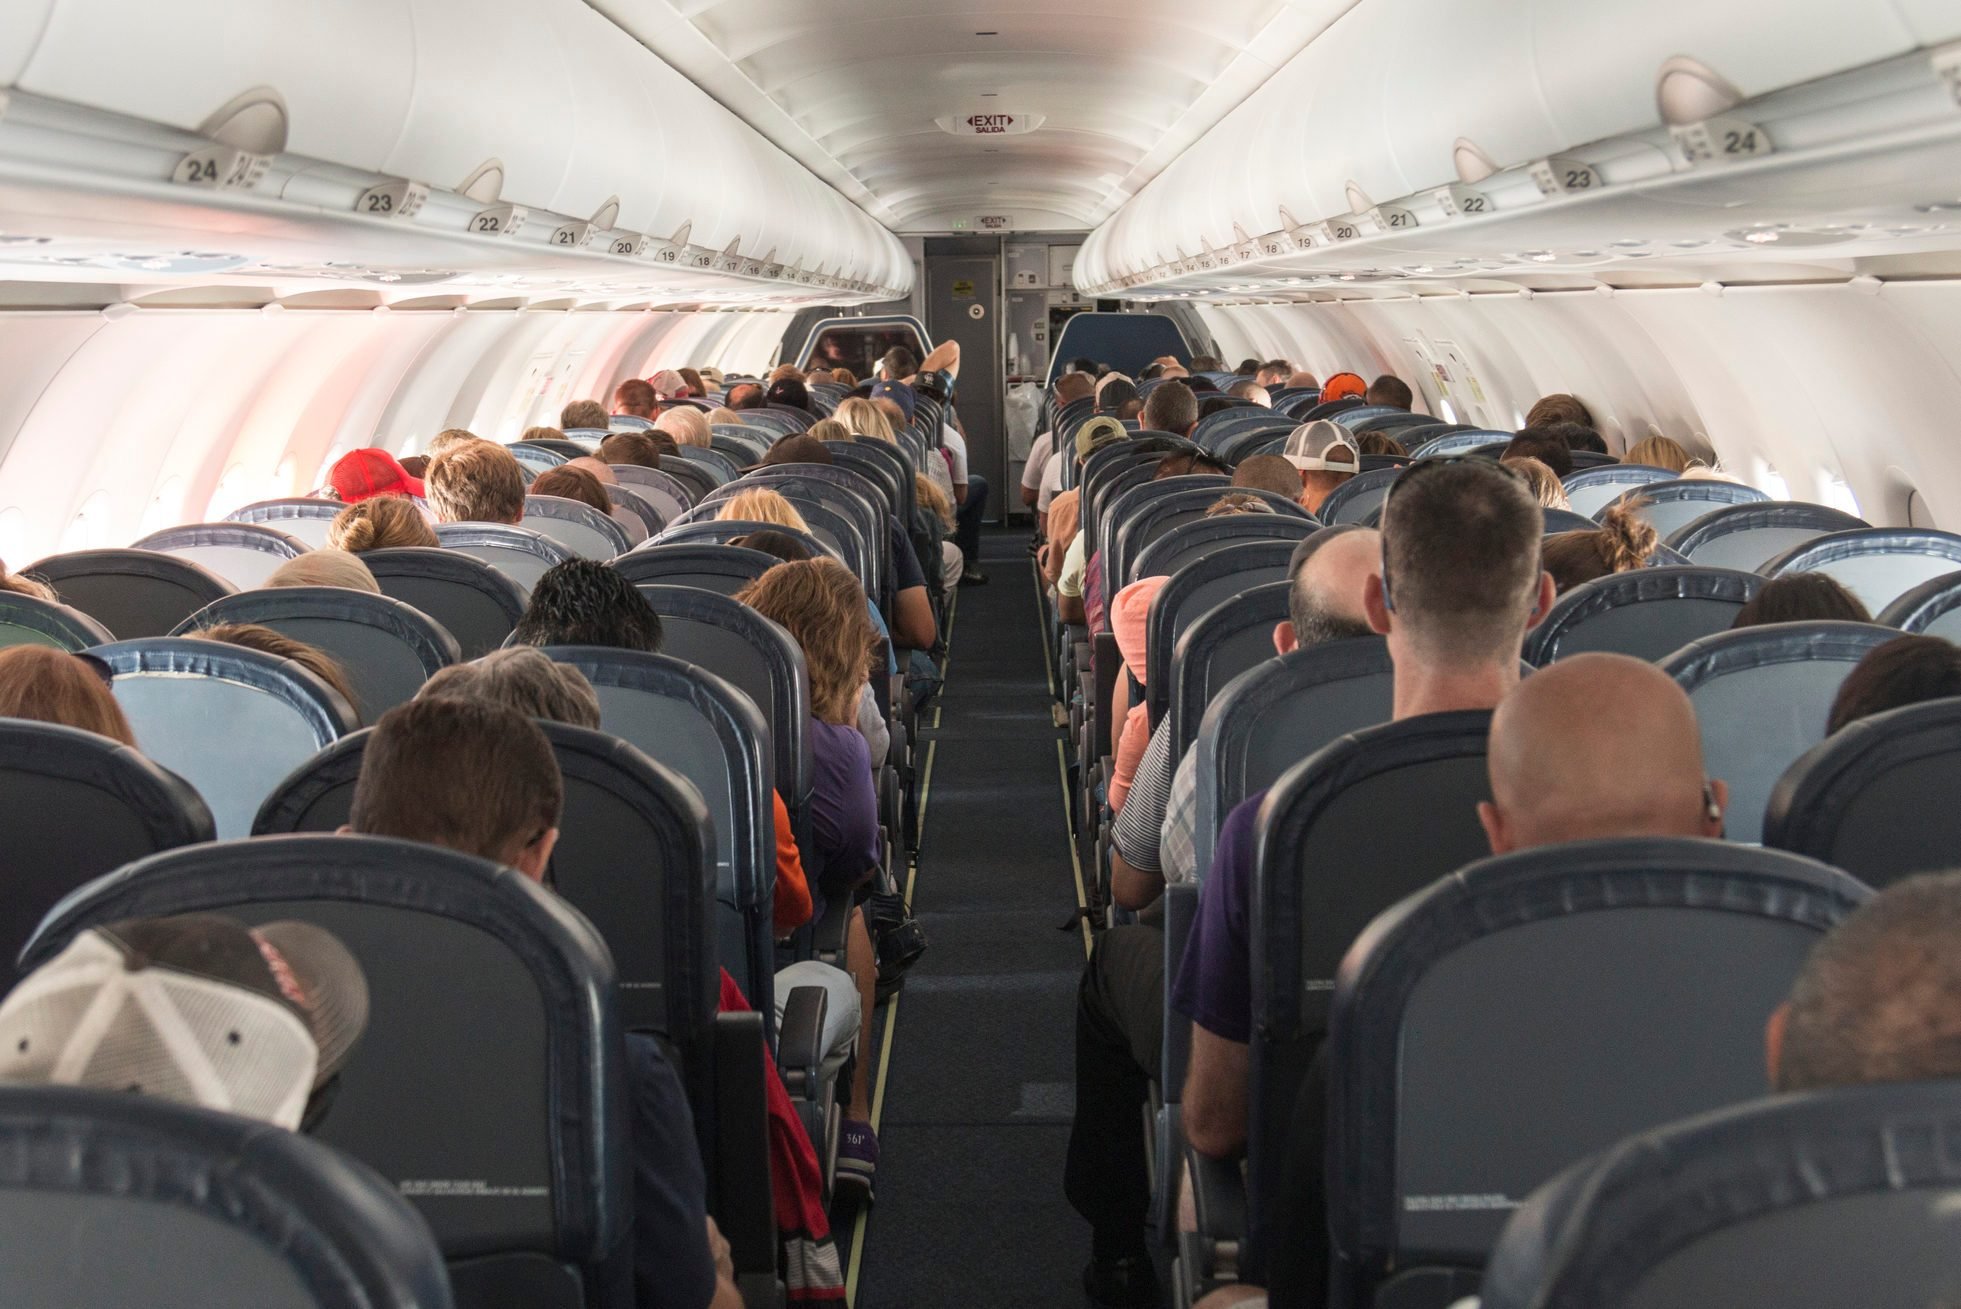 See For Yourself: How Airplanes Are Cleaned Today The New